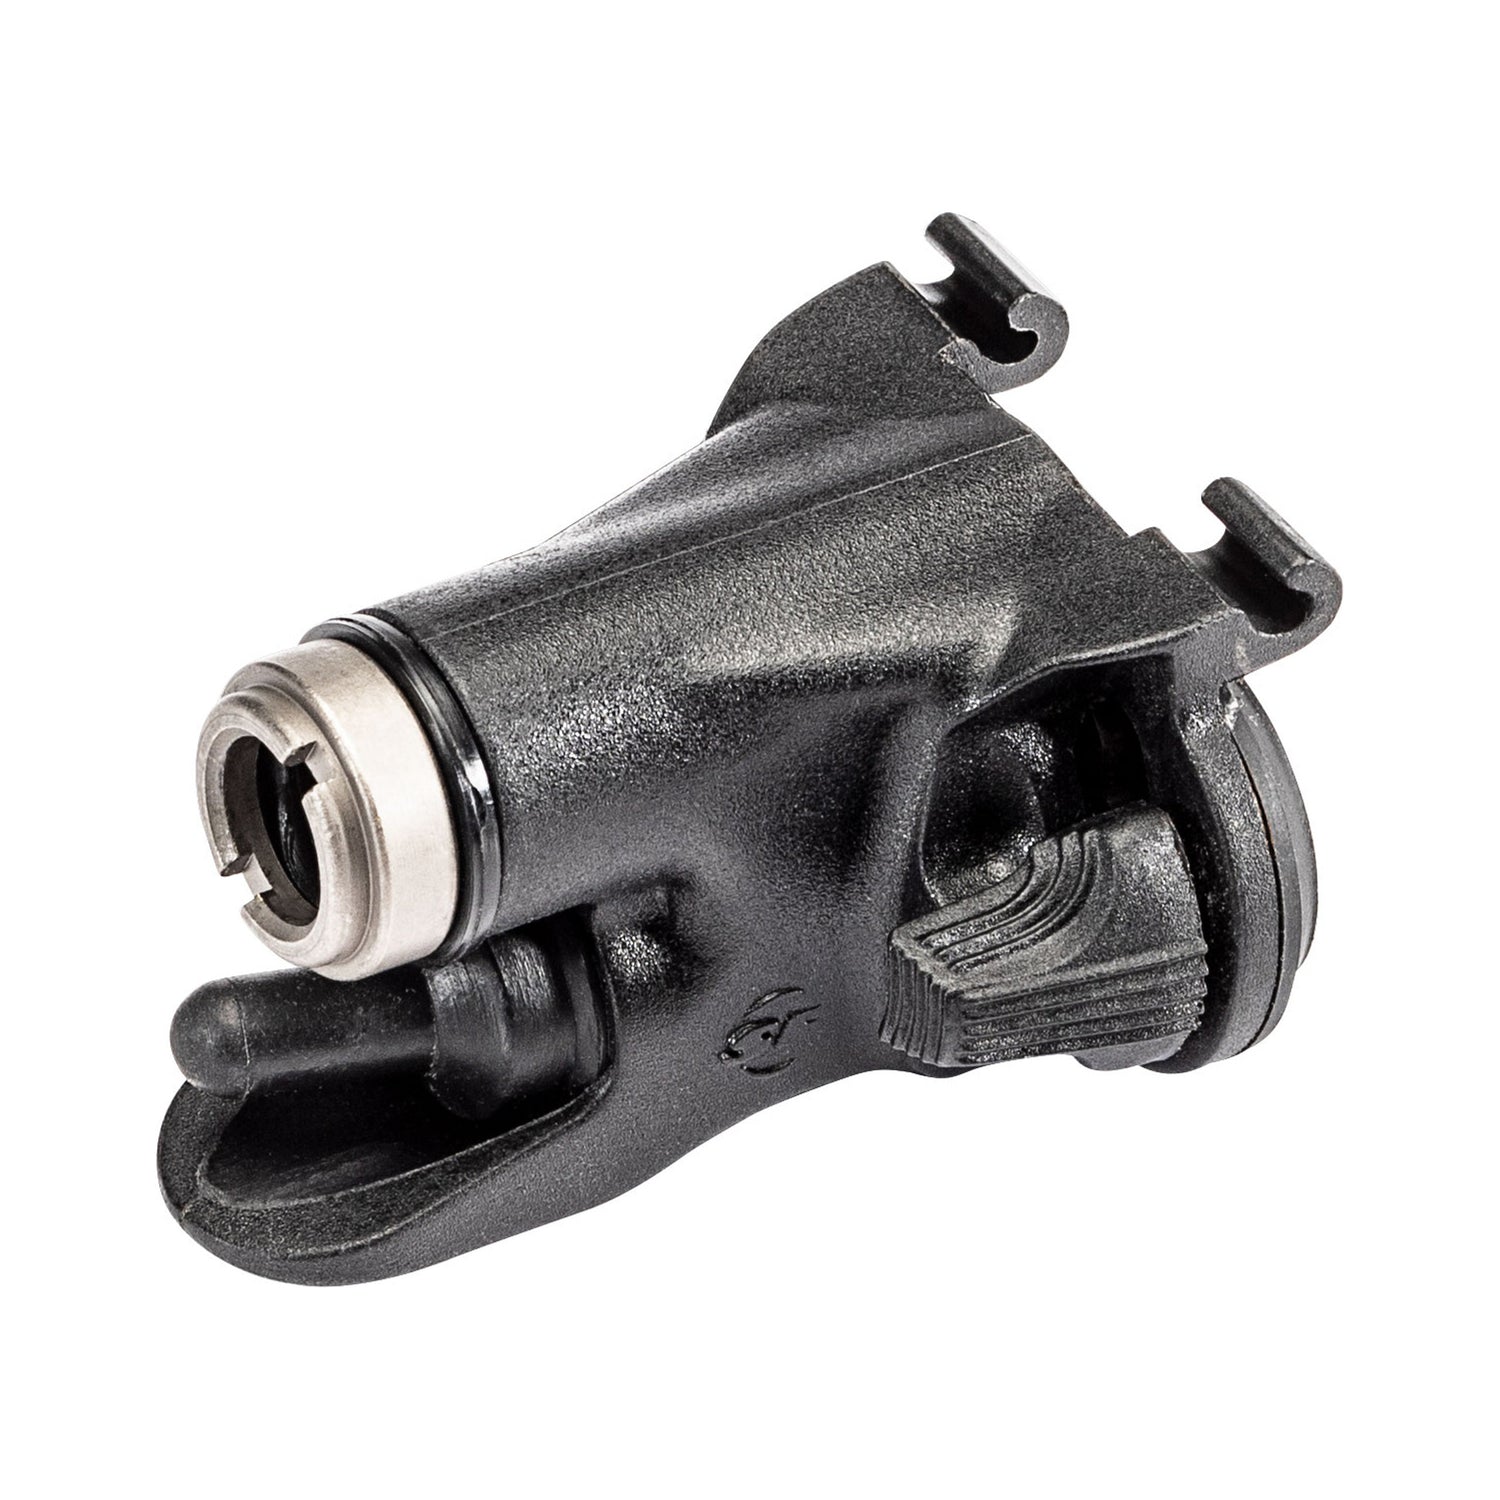 SureFire - XT00 Tailcap Switch Assembly for X300/X400 